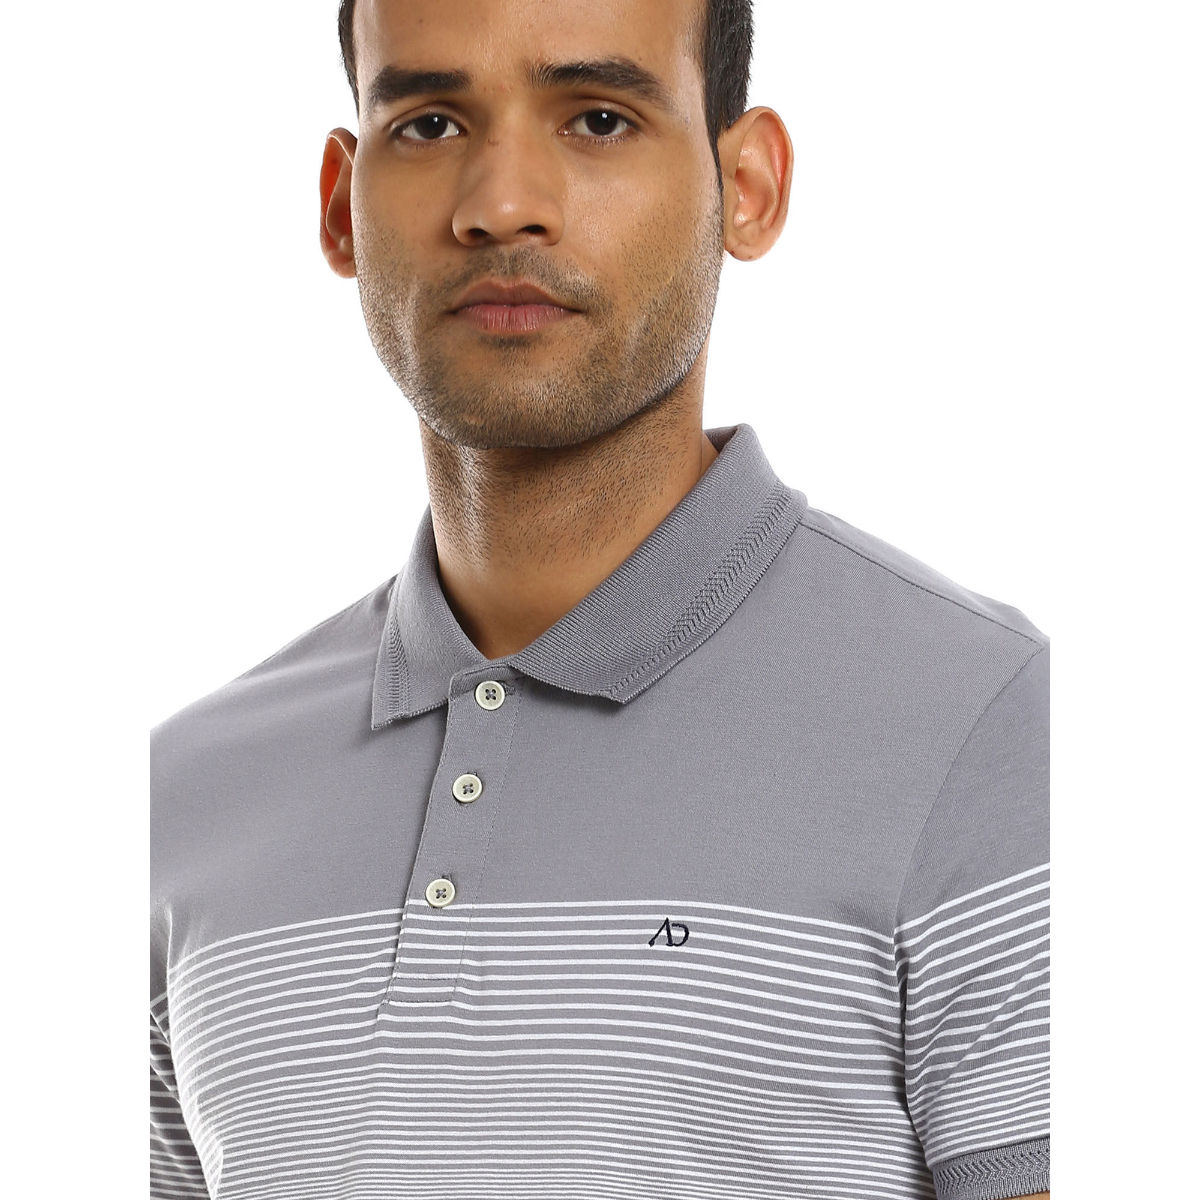 AD By Arvind Men Grey And White Striped Cotton Polo Shirt: Buy AD By ...